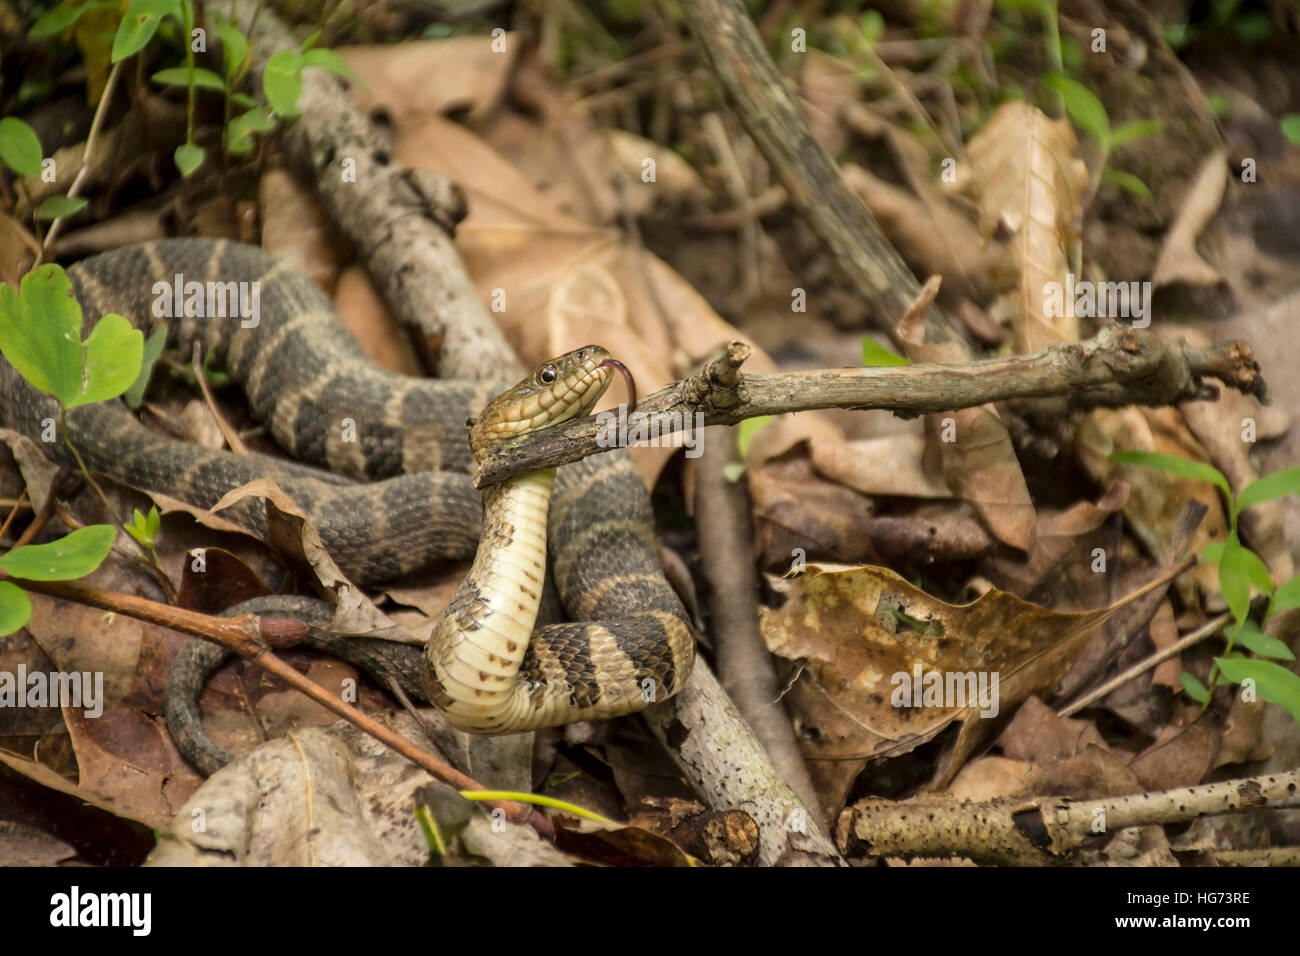 A Northern water snake being held up by a twig, showing its tongue. Stock Photo